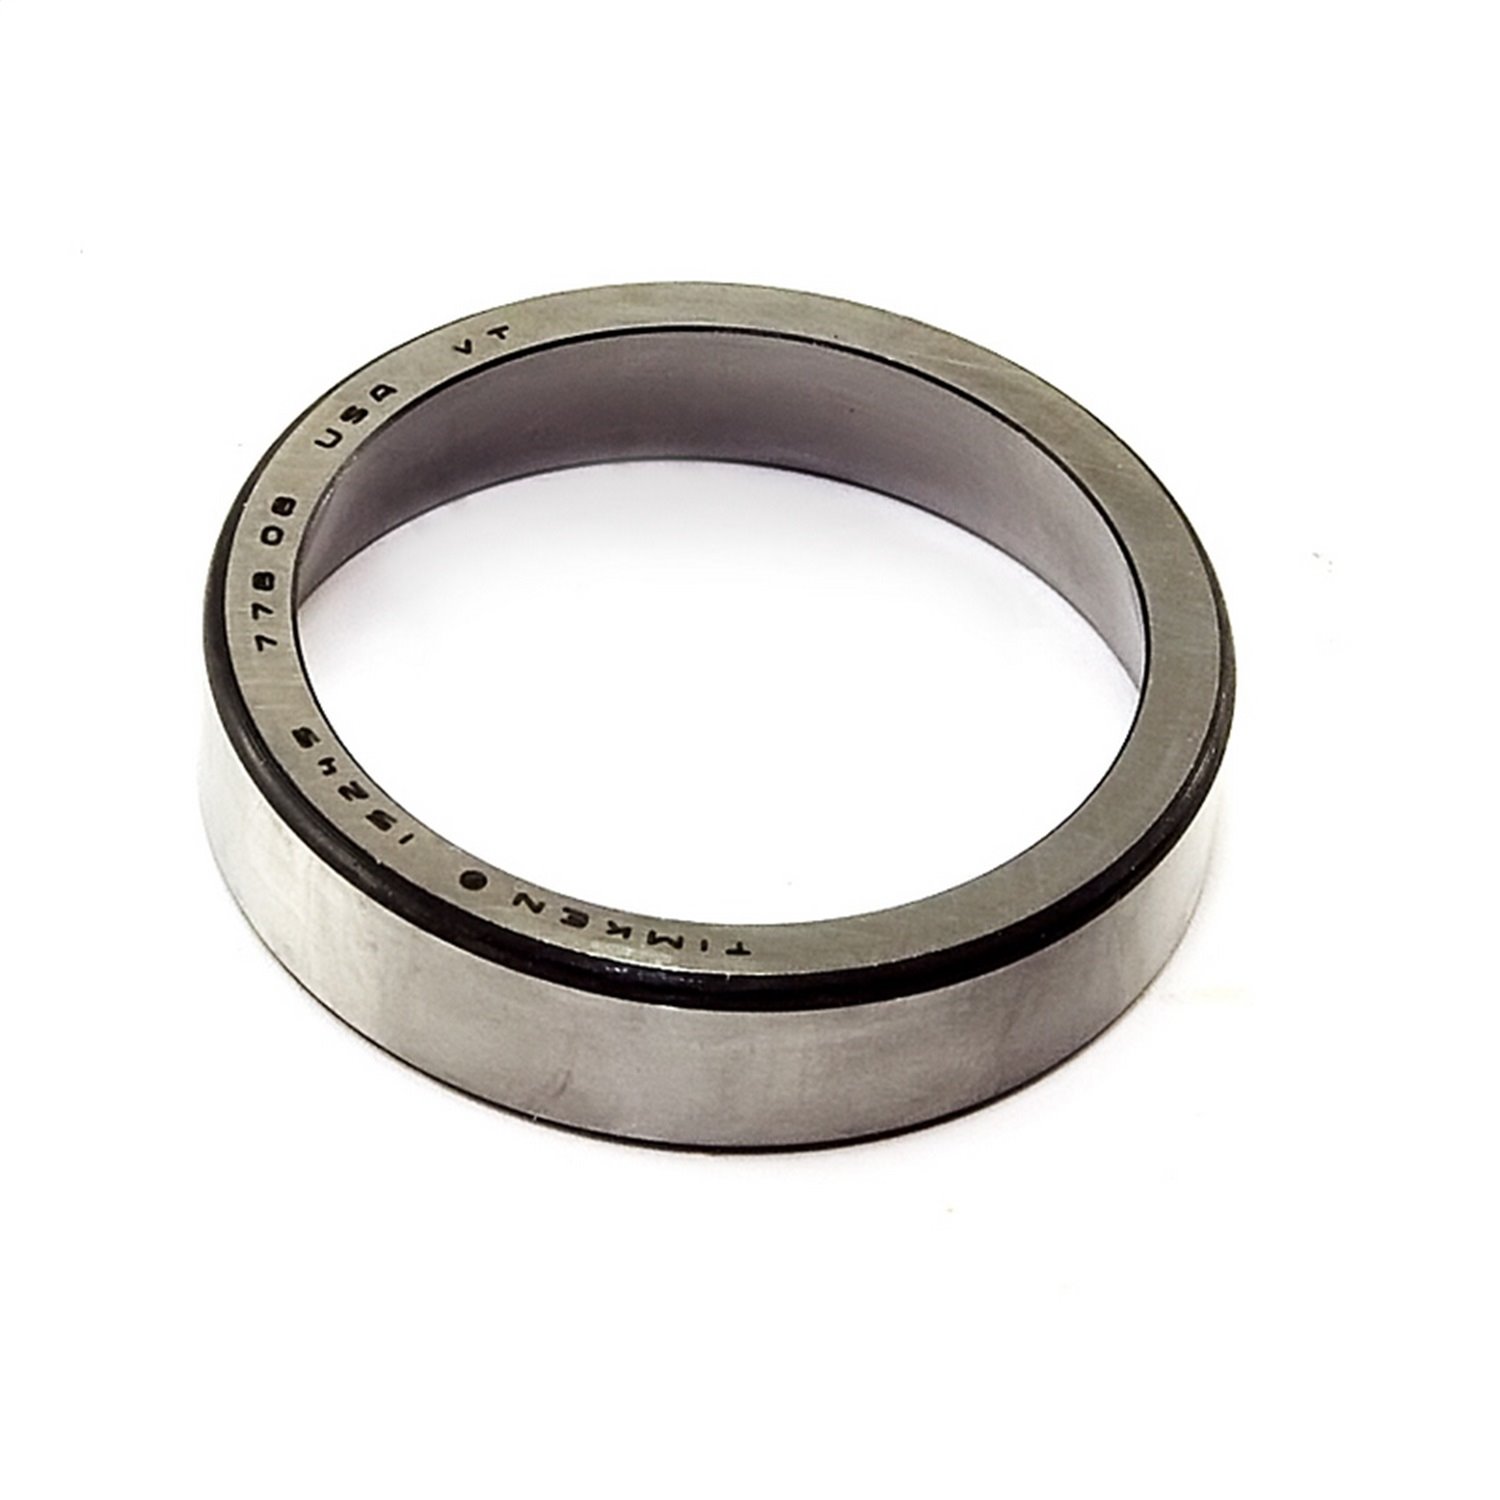 Transfer Case Output Shaft Bearing Cup for Dana 20 By Omix-ADA